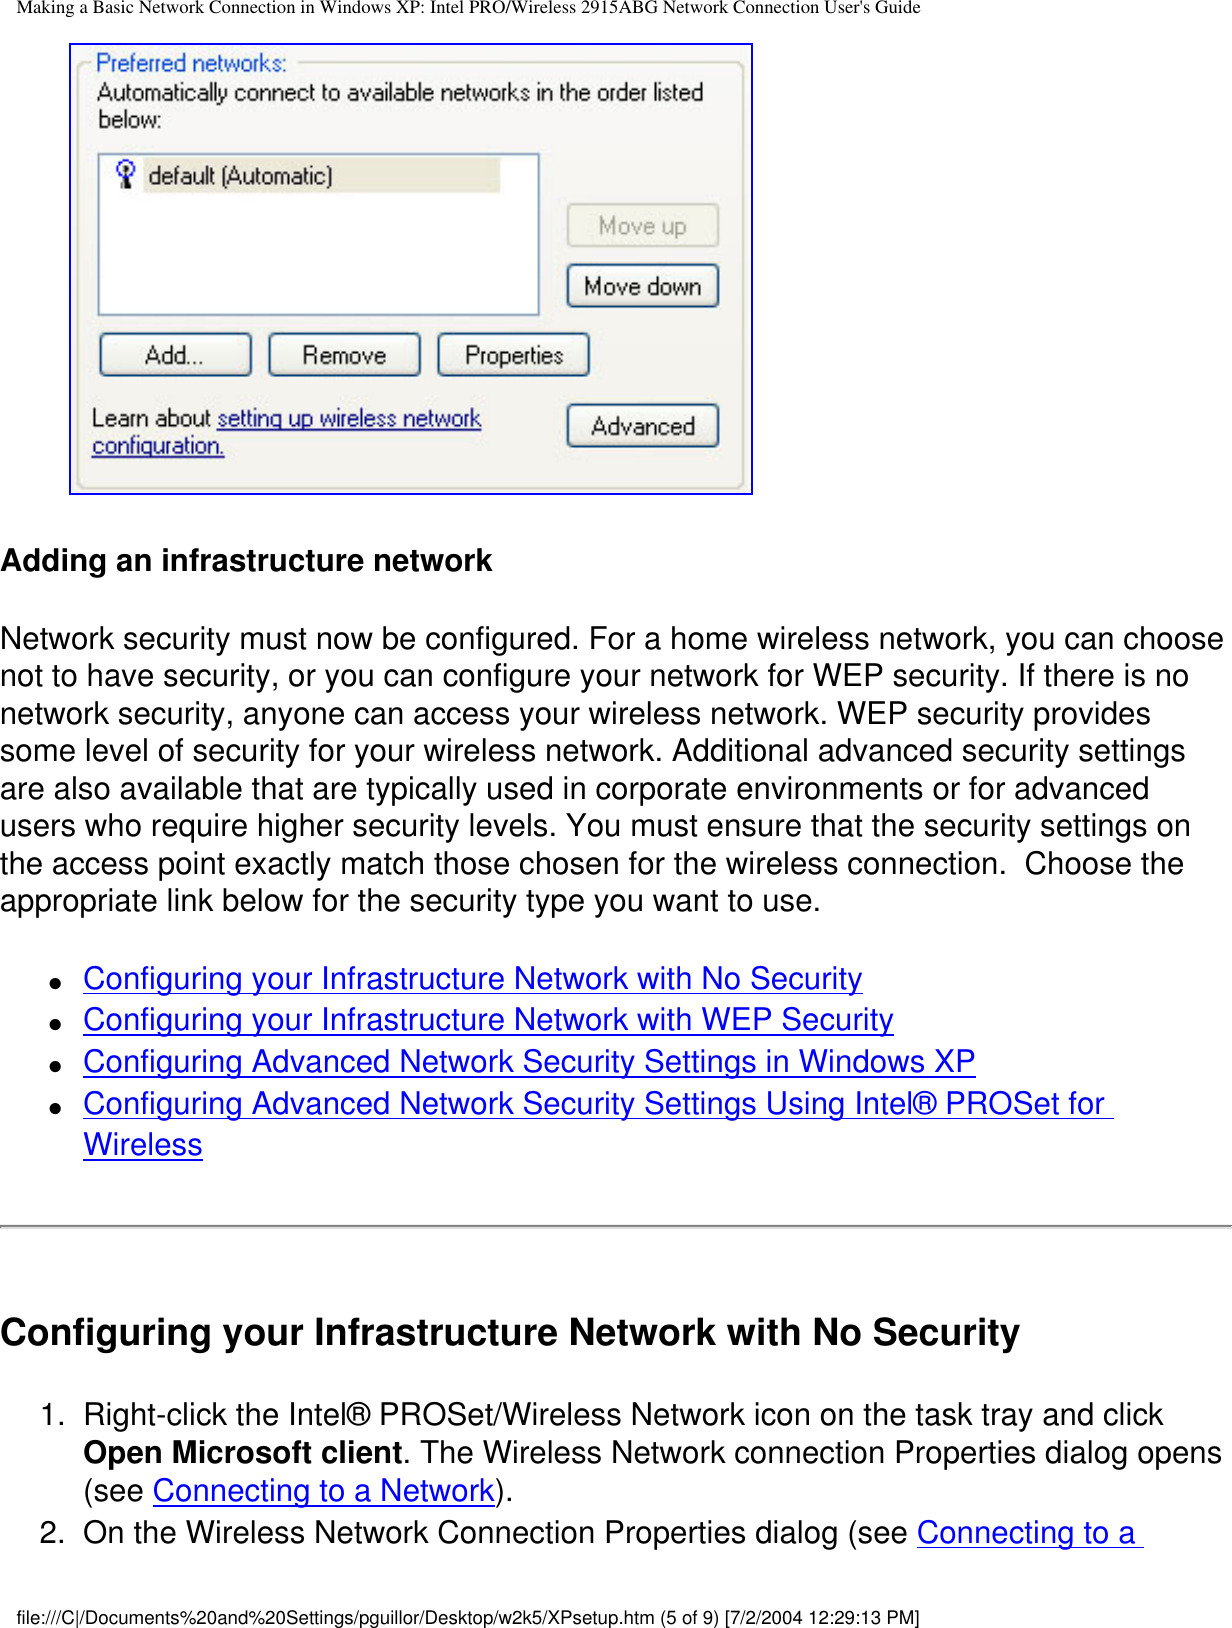 Making a Basic Network Connection in Windows XP: Intel PRO/Wireless 2915ABG Network Connection User&apos;s Guide        Adding an infrastructure networkNetwork security must now be configured. For a home wireless network, you can choose not to have security, or you can configure your network for WEP security. If there is no network security, anyone can access your wireless network. WEP security provides some level of security for your wireless network. Additional advanced security settings are also available that are typically used in corporate environments or for advanced users who require higher security levels. You must ensure that the security settings on the access point exactly match those chosen for the wireless connection.  Choose the appropriate link below for the security type you want to use.  ●     Configuring your Infrastructure Network with No Security●     Configuring your Infrastructure Network with WEP Security●     Configuring Advanced Network Security Settings in Windows XP●     Configuring Advanced Network Security Settings Using Intel® PROSet for WirelessConfiguring your Infrastructure Network with No Security1.  Right-click the Intel® PROSet/Wireless Network icon on the task tray and click Open Microsoft client. The Wireless Network connection Properties dialog opens (see Connecting to a Network).2.  On the Wireless Network Connection Properties dialog (see Connecting to a file:///C|/Documents%20and%20Settings/pguillor/Desktop/w2k5/XPsetup.htm (5 of 9) [7/2/2004 12:29:13 PM]